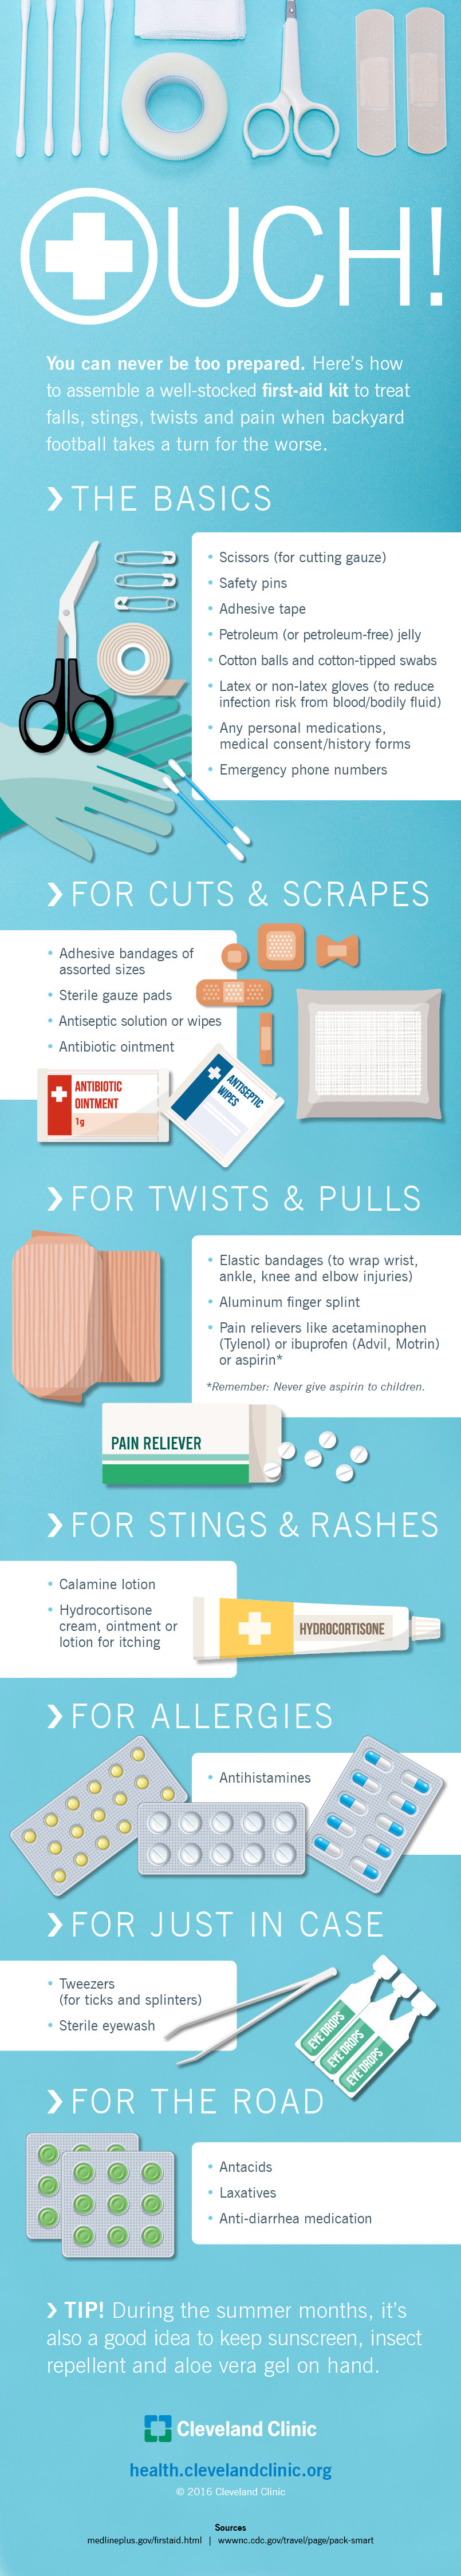 16-hhb-1456-first-aid-infographic-fnl